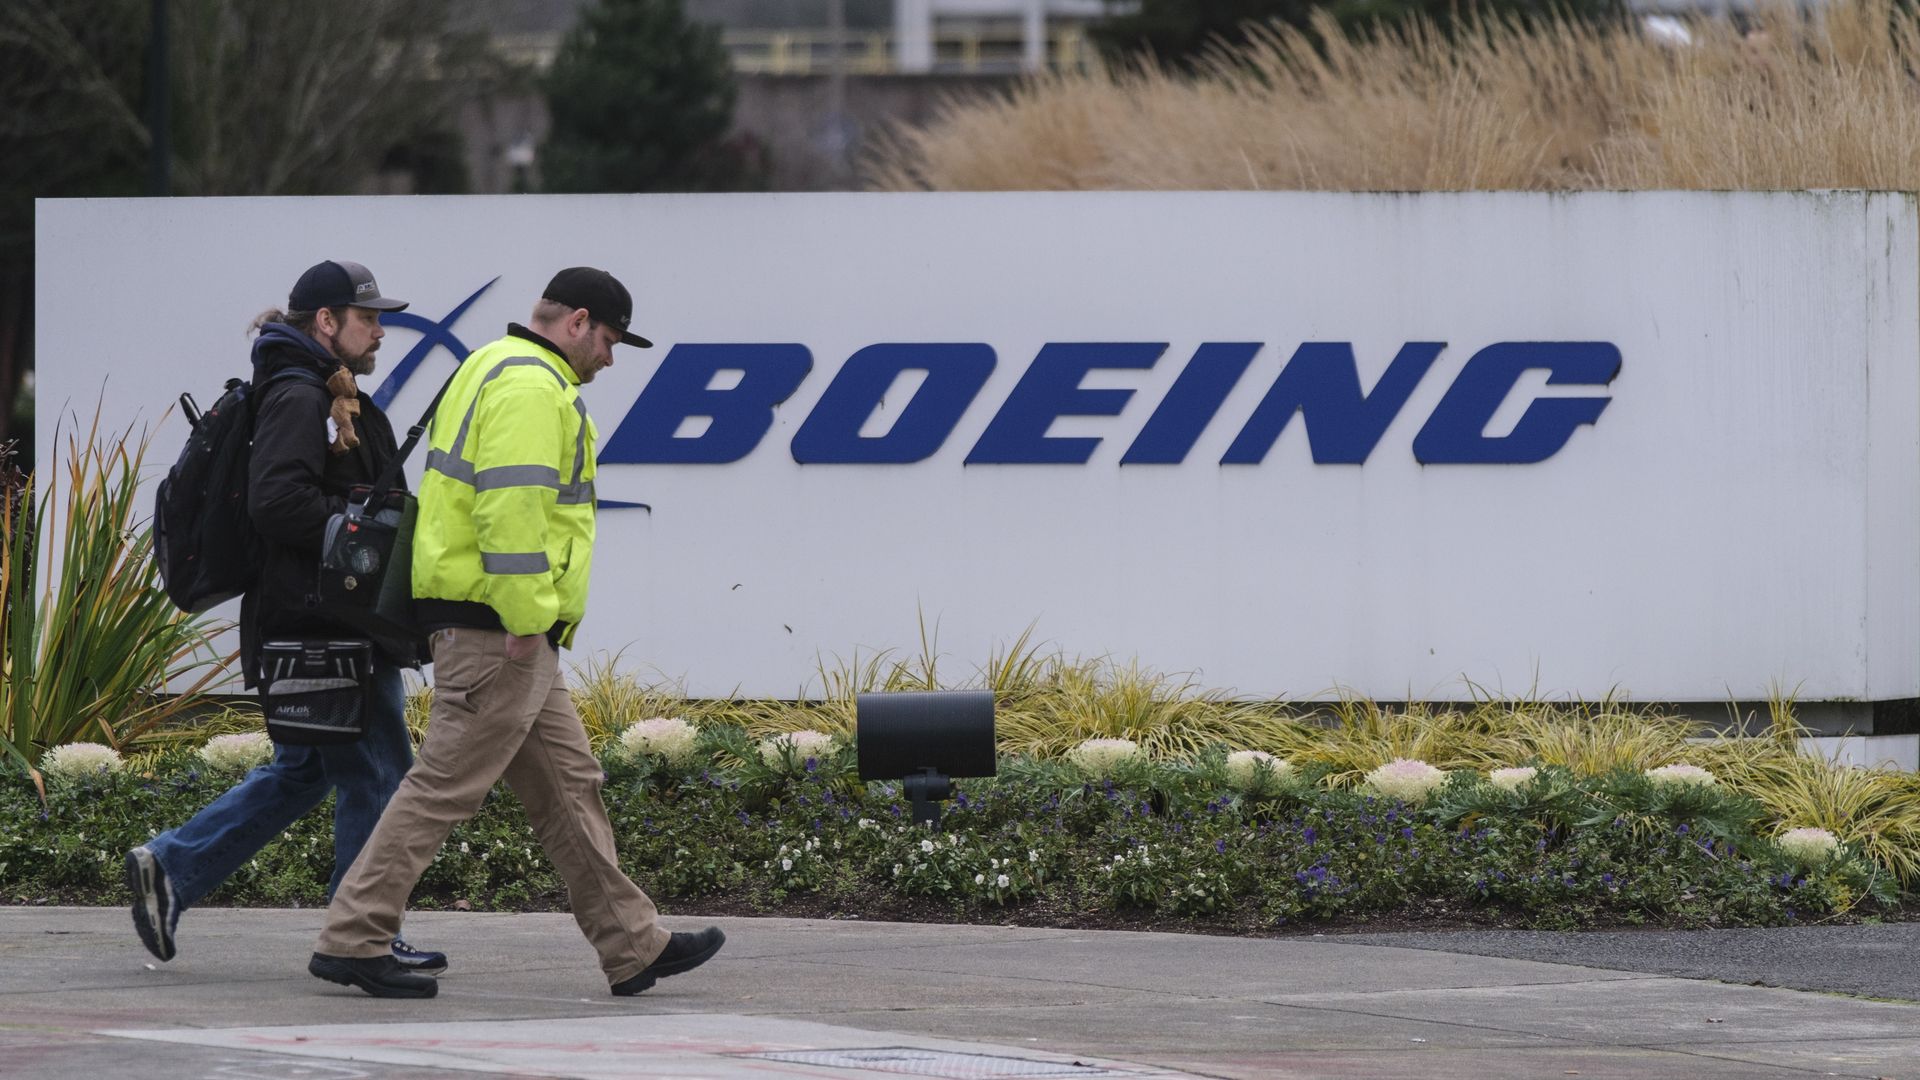 Workers walk in to the Boeing 737 factory on December 16, 2019 in Renton, Washington.